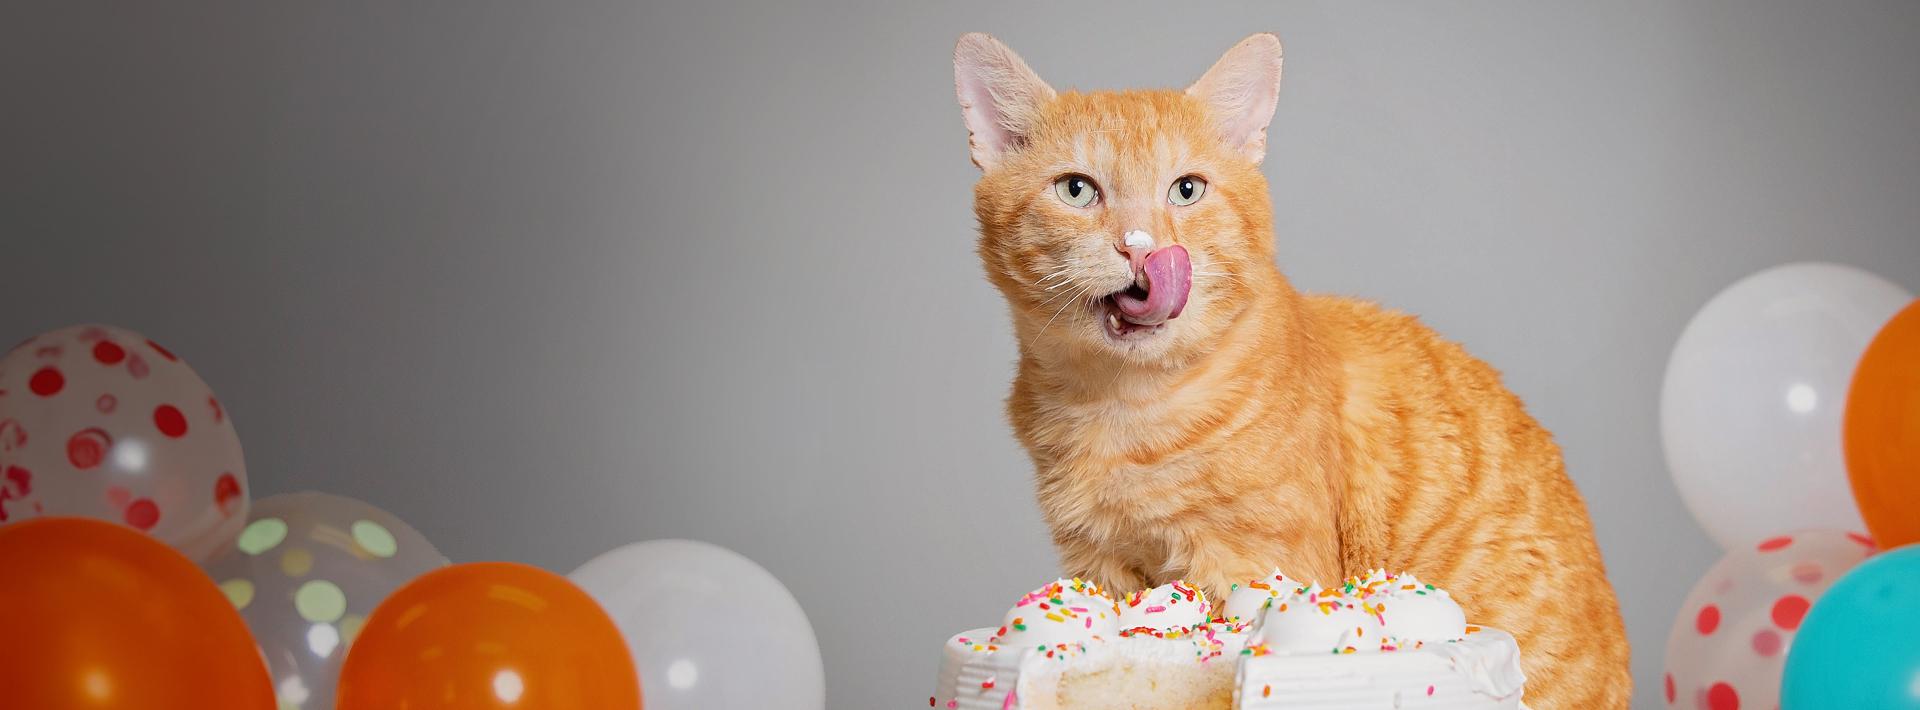 Cat licking lips from eating icing from a cake, surrounded by balloons